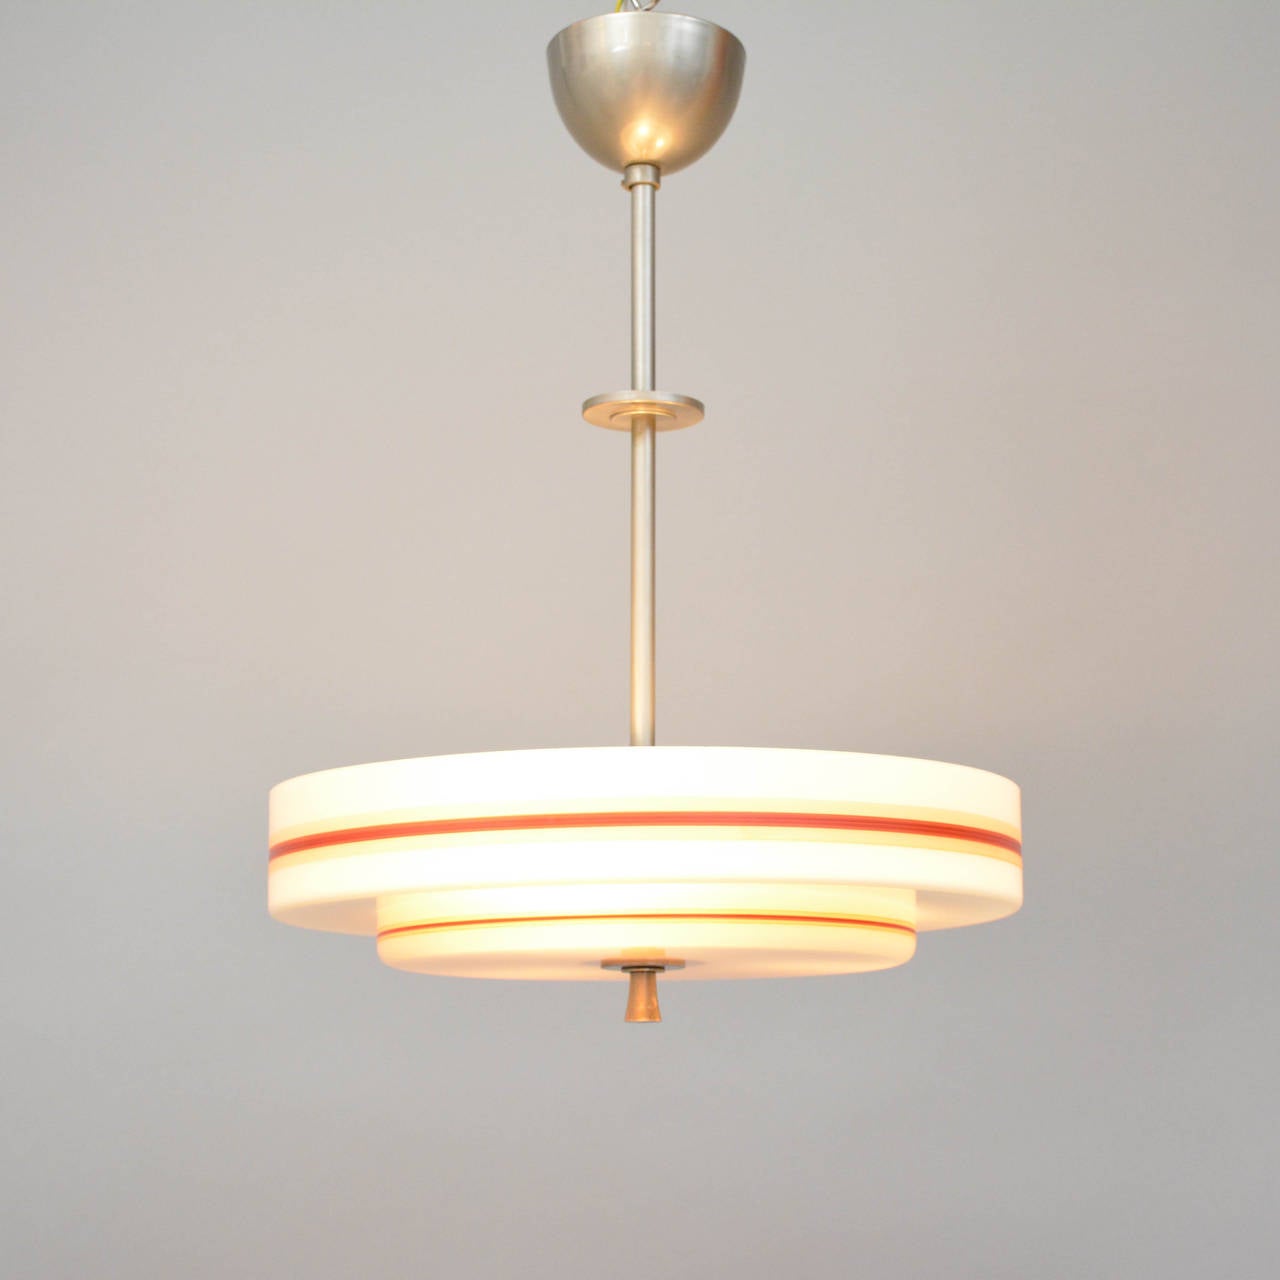 Ceiling lamp by Bohlmarks Stockholm 1930s. Painted glass and nickel-plated steel. Three points of light. Böhlmarks was the leading manufacturer in Sweden at the time.